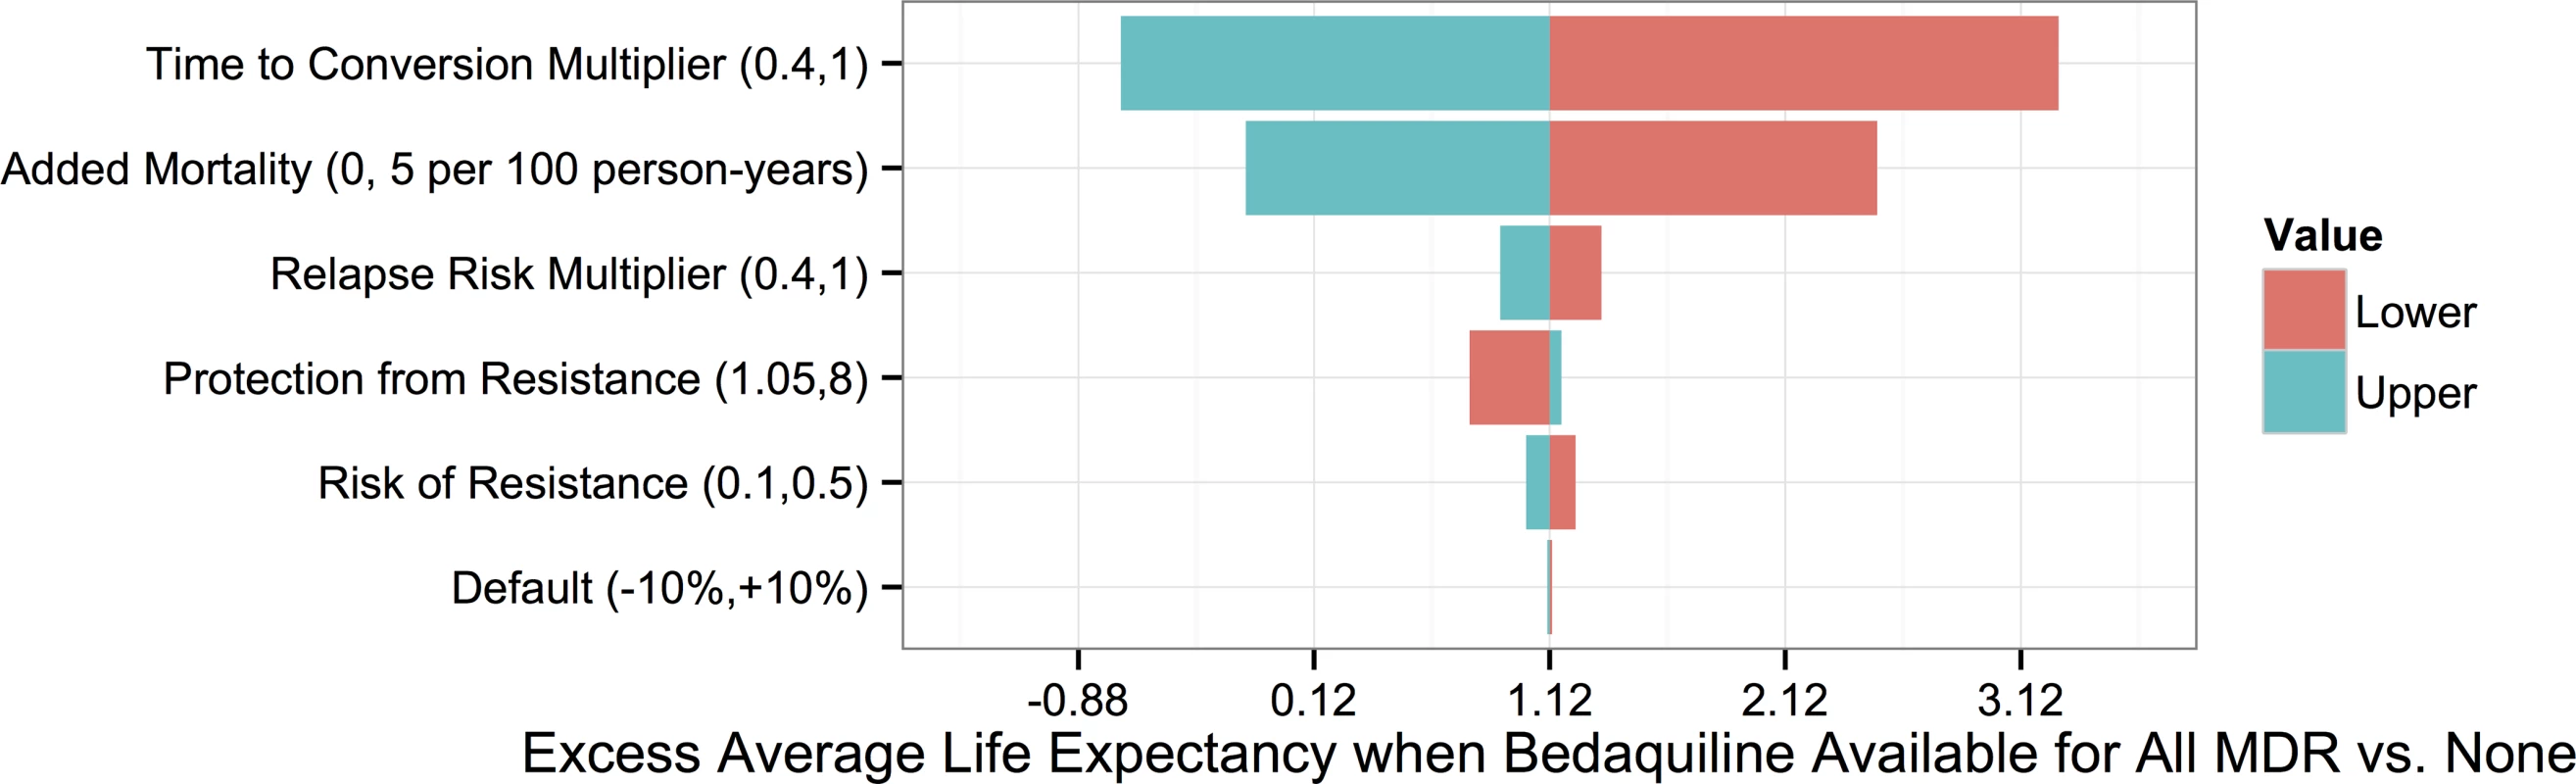 Tornado plot displaying how the potential improvement in average life expectancy that would result from use of bedaquiline for all patients with MDR TB versus no patients depends on the values of particular parameters.